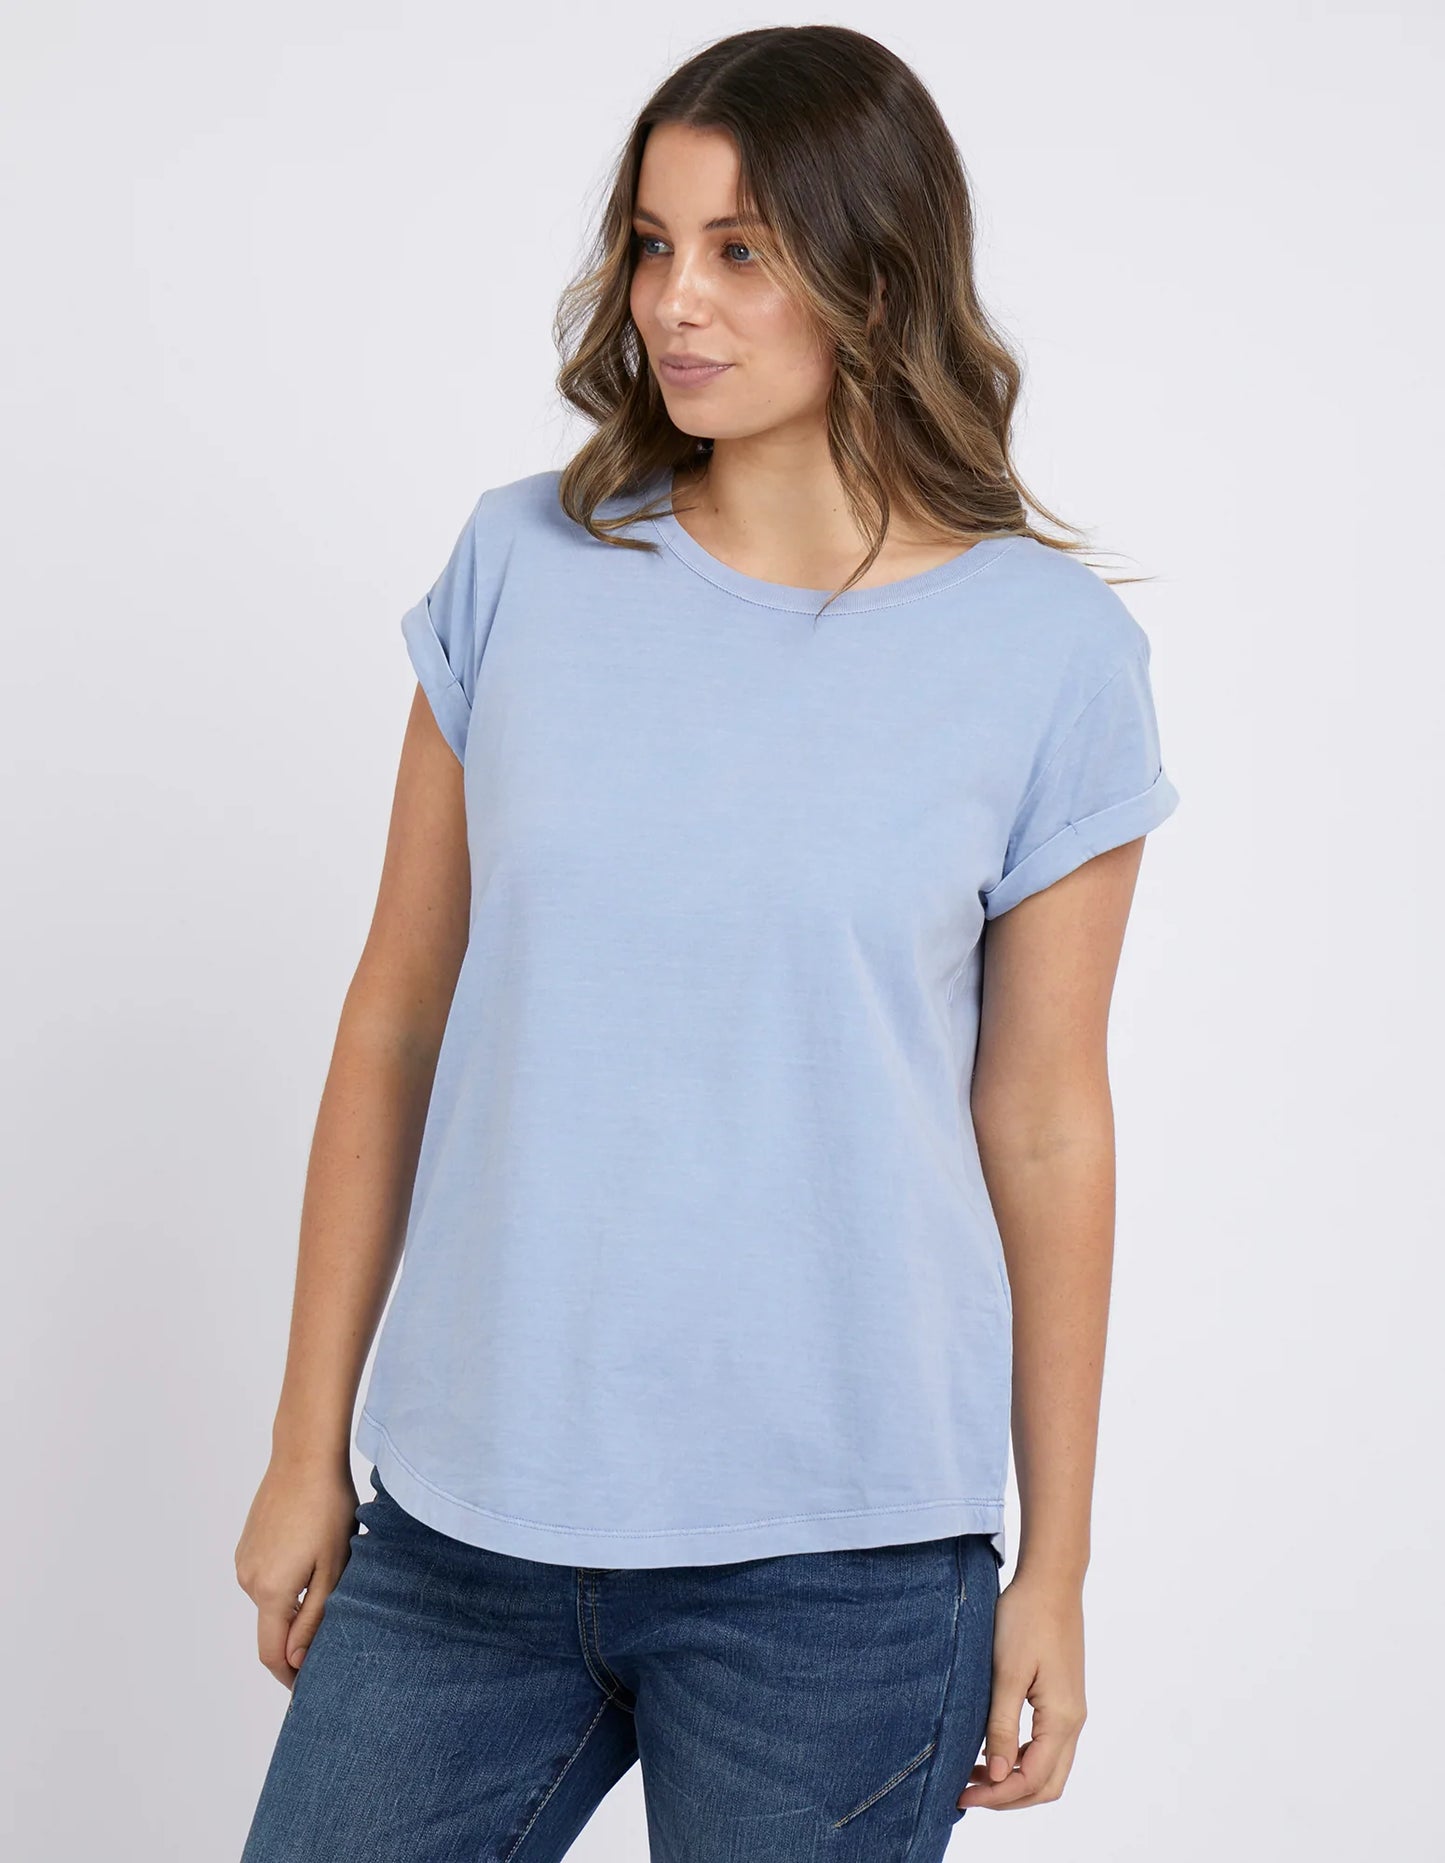 Manly Tee - Light Blue